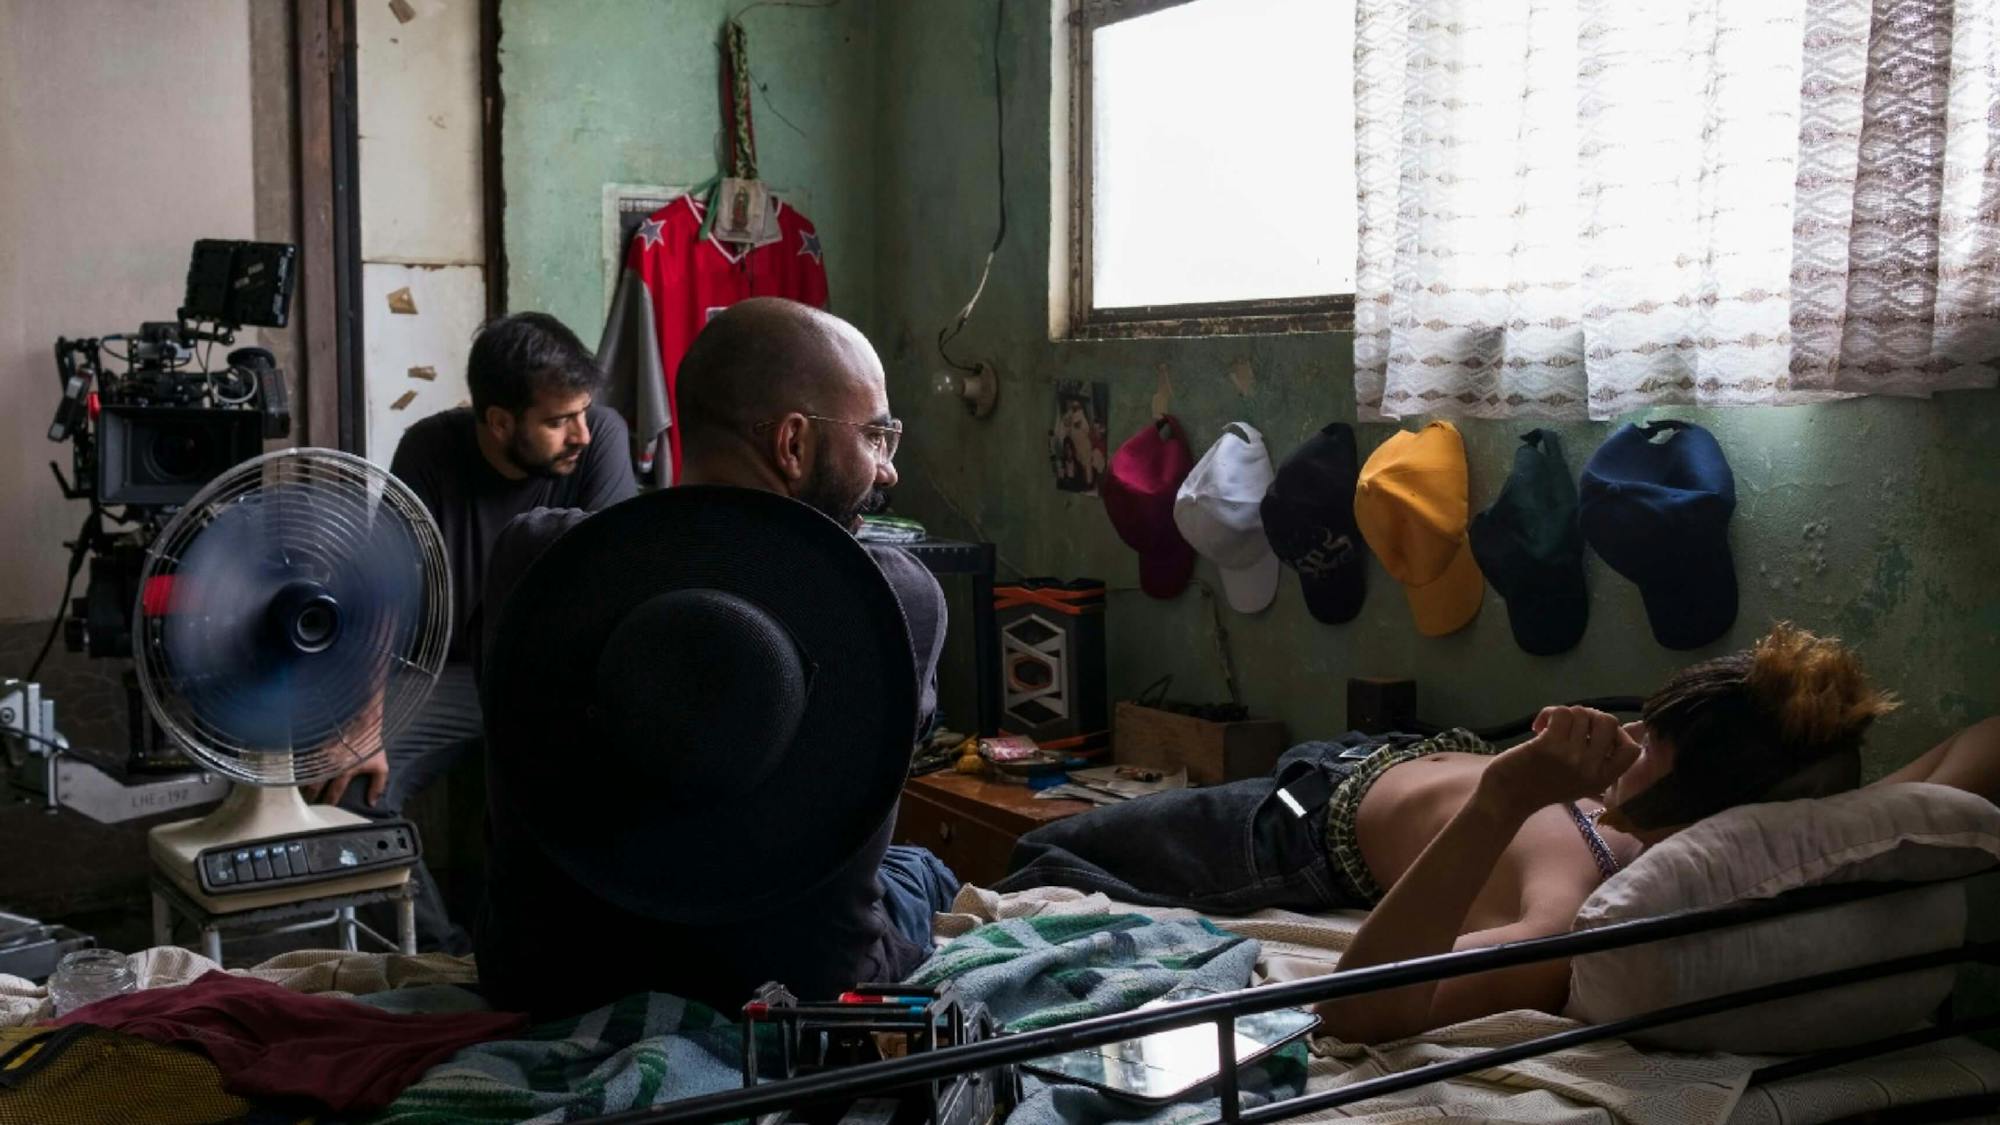 The cinematographer, director, and actor appear in a cramped room with peeling paint, crowded with the character Ulises’s personal belongings.